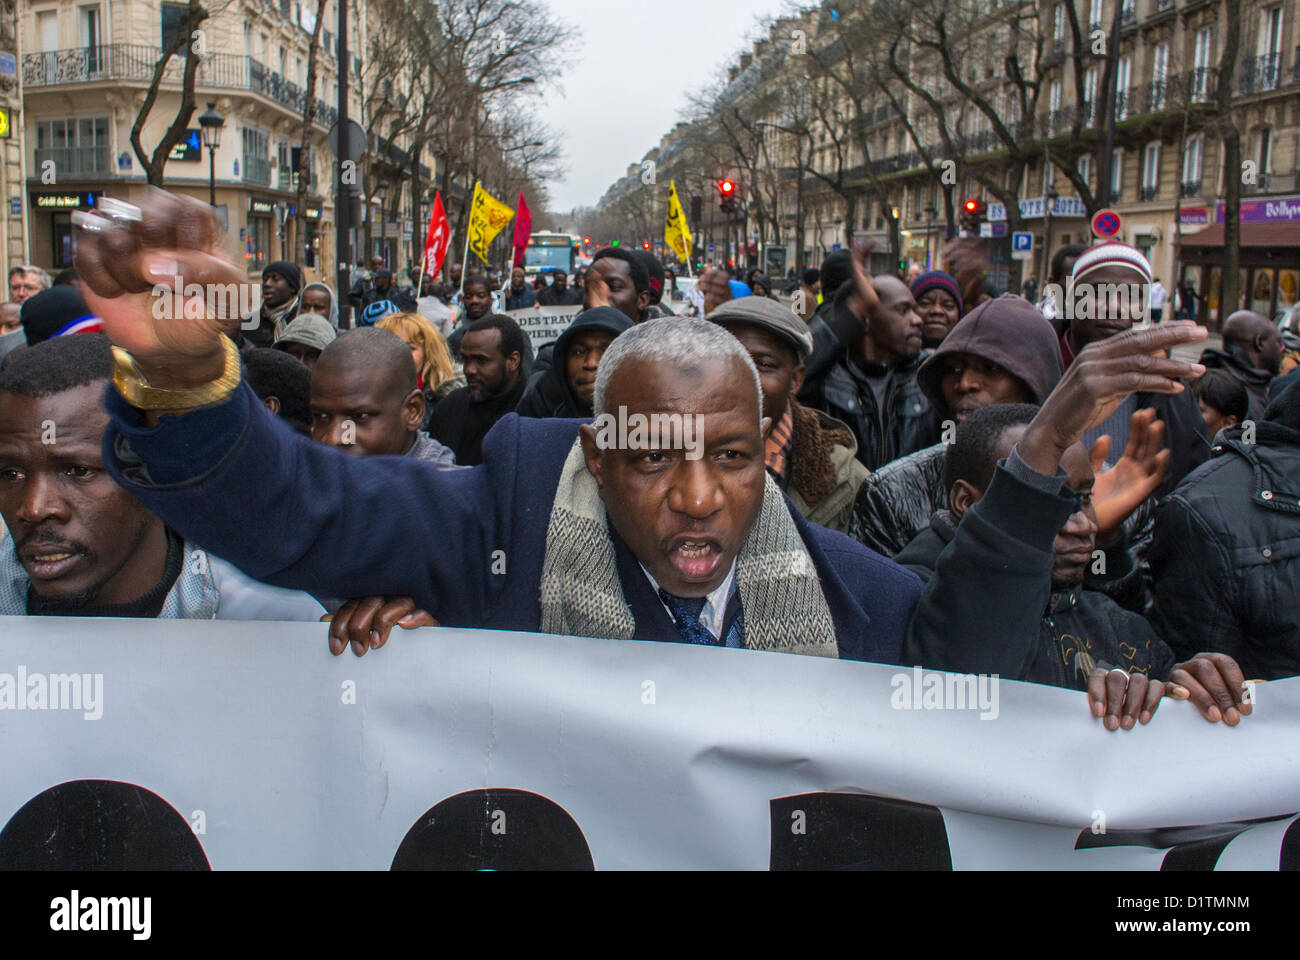 Paris, France, Sans Papers Protesting French Government, African Immigrants, Black Migrants, Holding up Fist, Chanting, Marching with Banners, activist protest, europe migrants, immigrant labor, immigrants rights, immigrant worker france, Europe Stock Photo